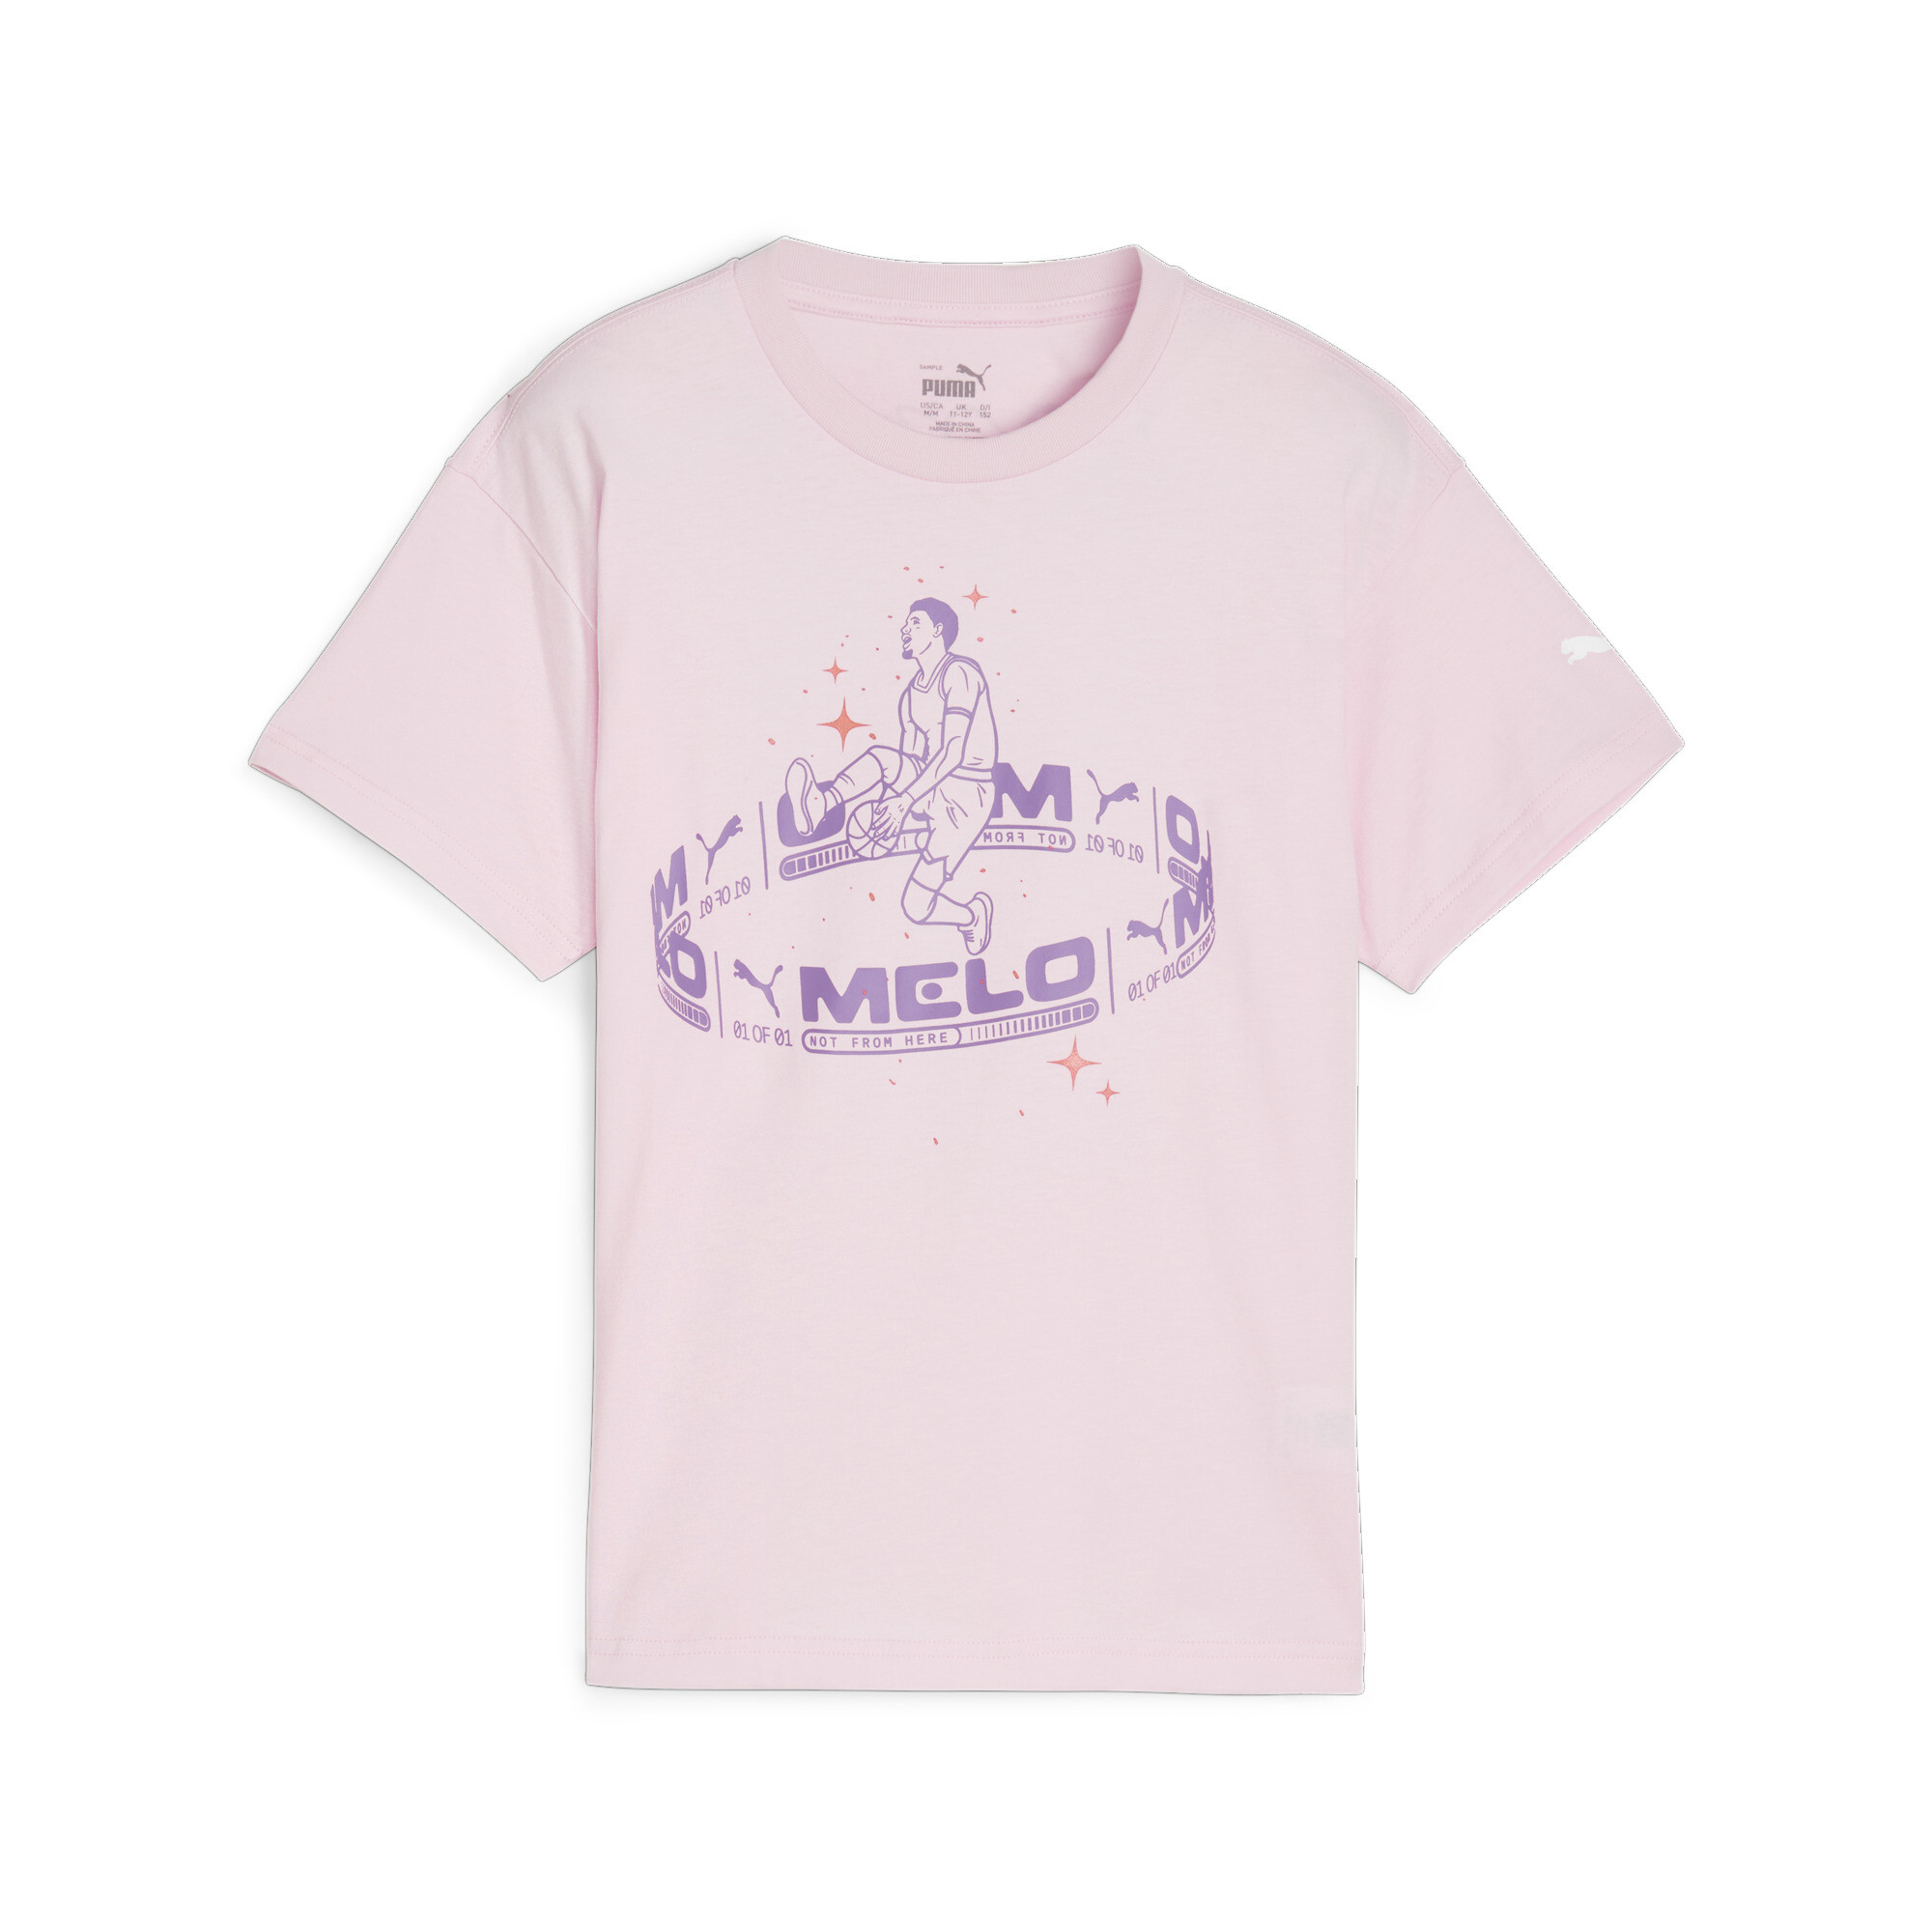 Puma MELO IRIDESCENT Boys' T-Shirt, Pink, Size 9-10Y, Age